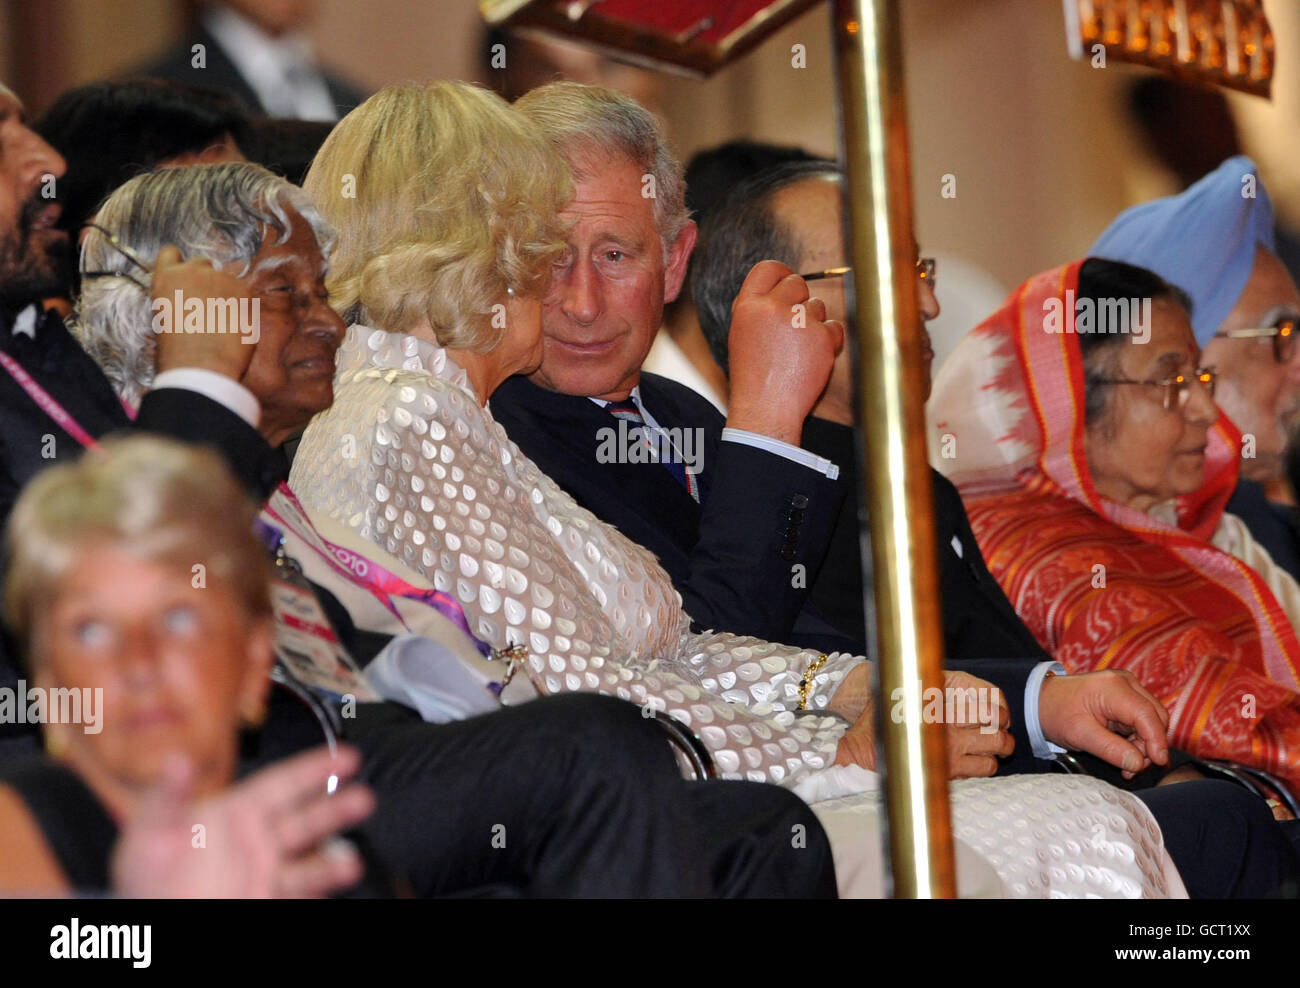 The Prince of Wales and the Duchess of Cornwall attend the opening ceremony of the 2010 Commonwealth Games in New Delhi, India. Stock Photo